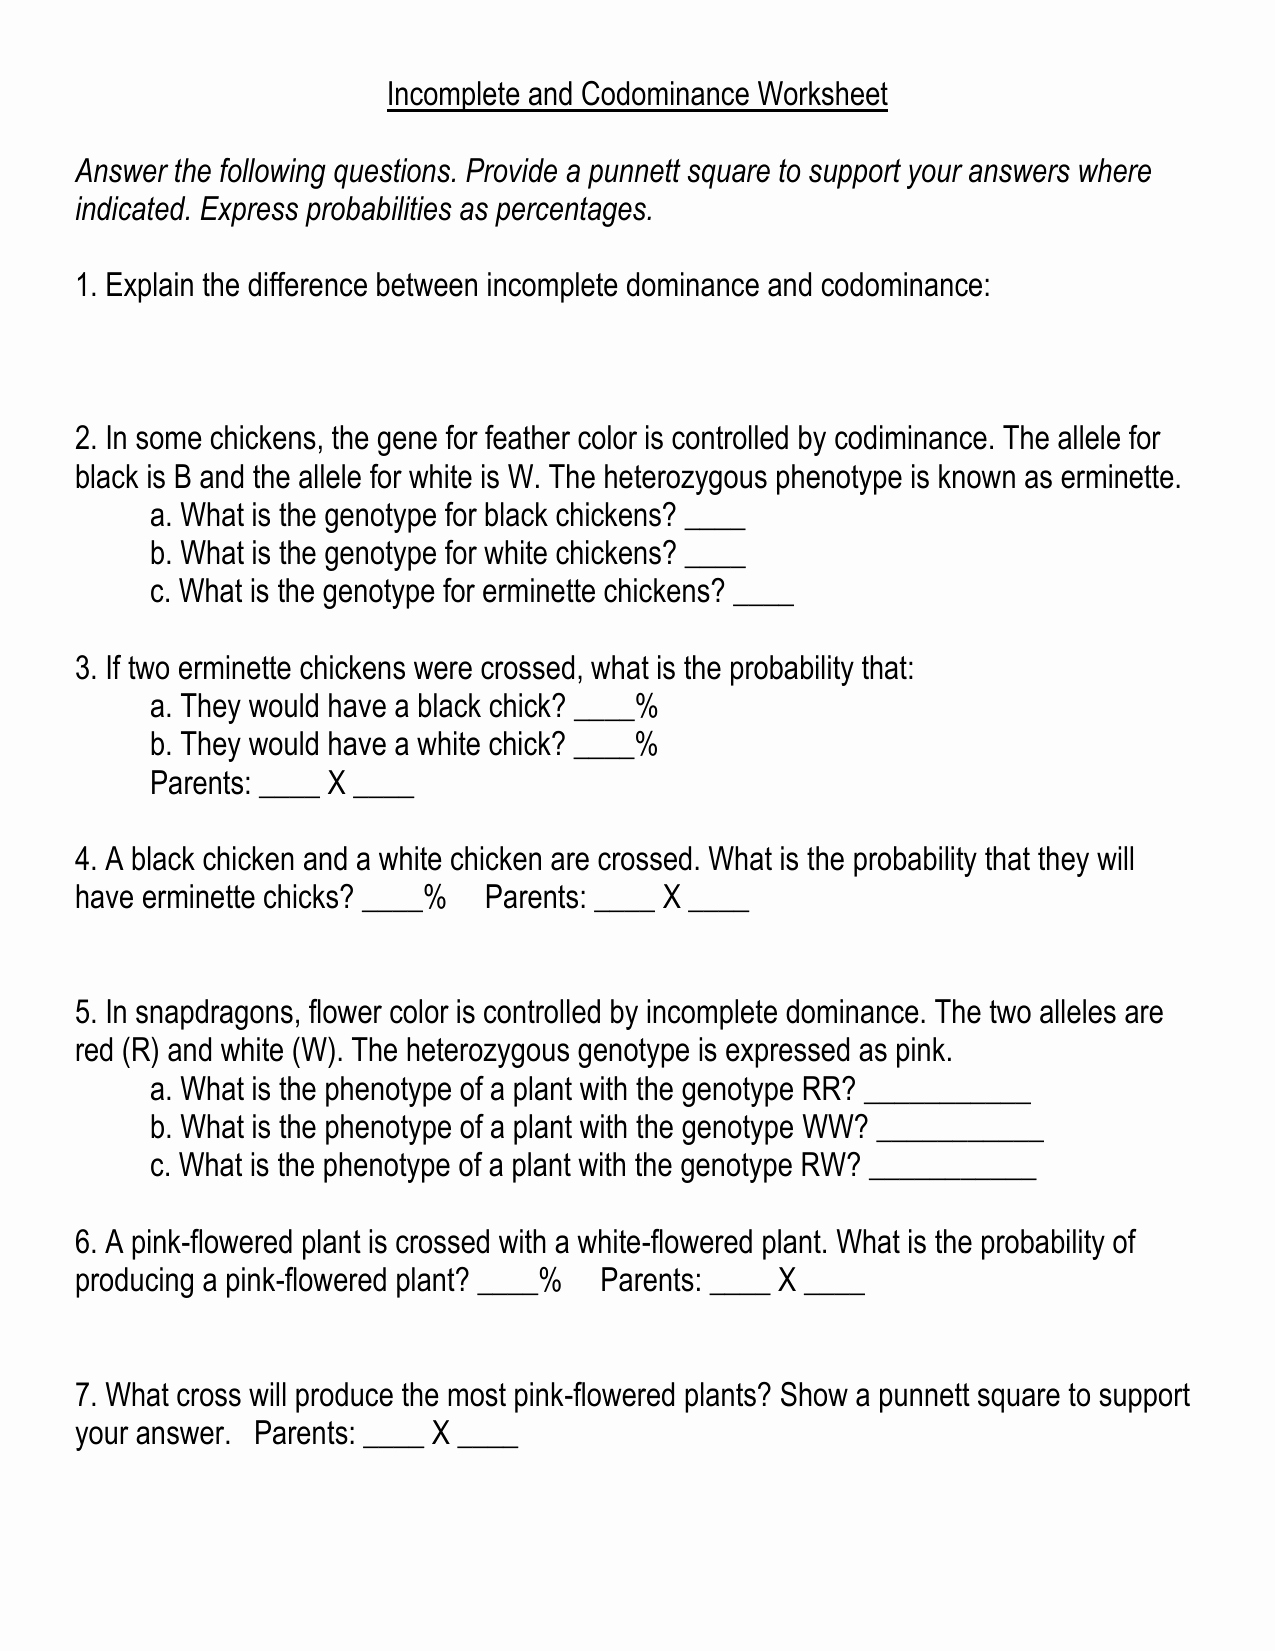 Incomplete and Codominance Worksheet New Codominance and In Plete Dominance Worksheet